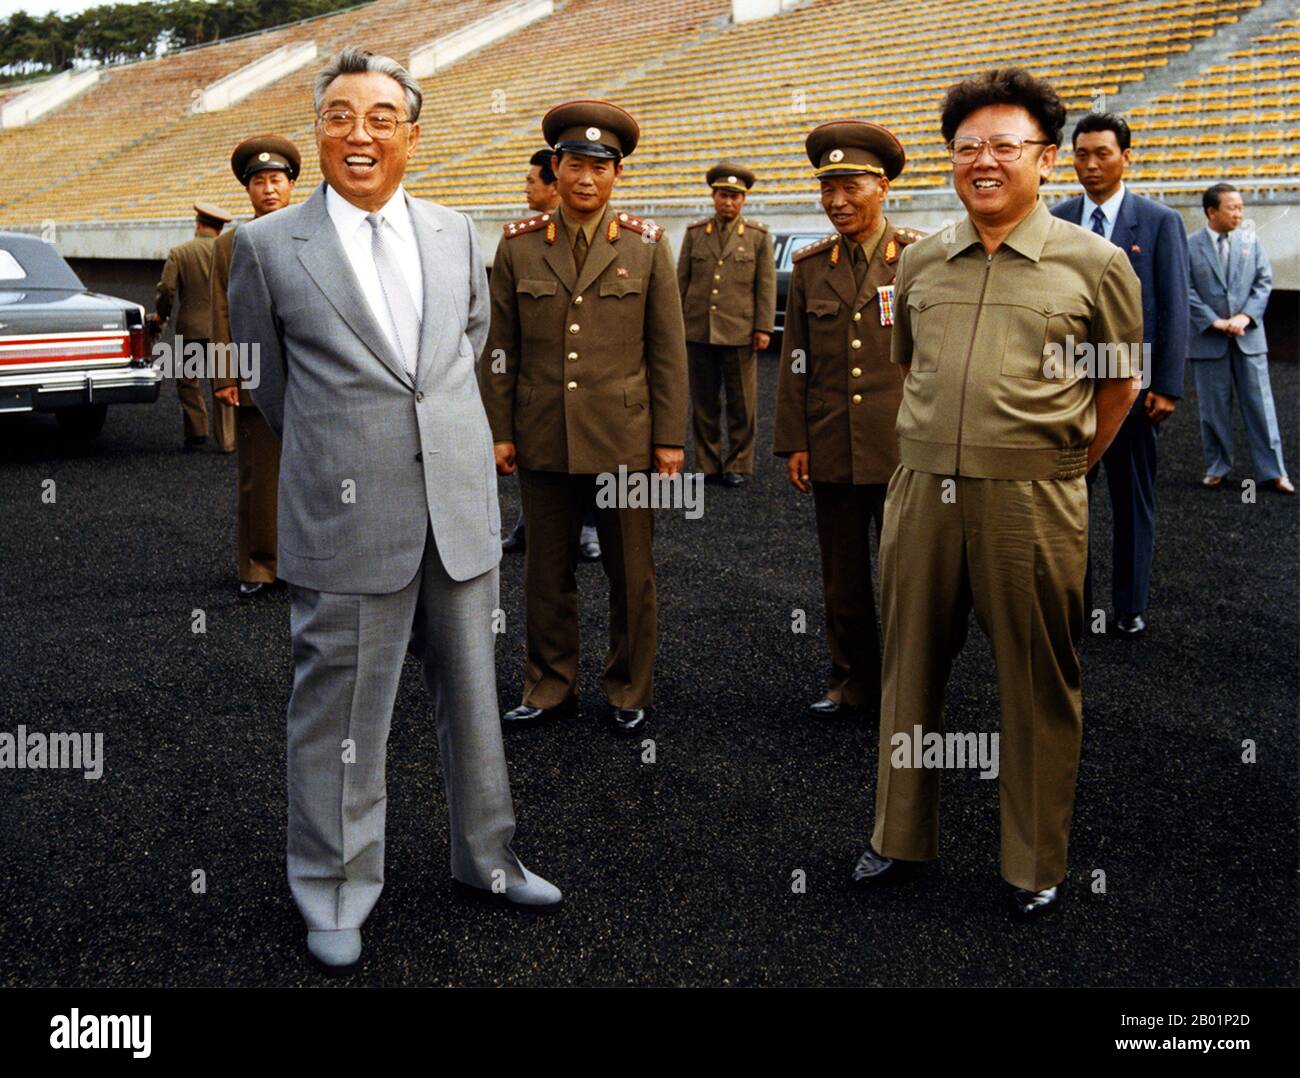 Korea: North Korean leader Kim Il Sung (15 April 1912 - 8 July 1994) at a football stadium wth his heir and successor Kim Jong Il, c. 1985.  Kim Il-sung was a Korean communist politician who ruled North Korea, officially the Democratic People's Republic of Korea, from its establishment in 1948 until his death in 1994. He held the posts of Prime Minister from 1948 to 1972 and President from 1972 to his death. He was also the leader of the Workers' Party of Korea from 1949 to 1994 (titled as chairman from 1949 to 1966 and as general secretary after 1966). Stock Photo